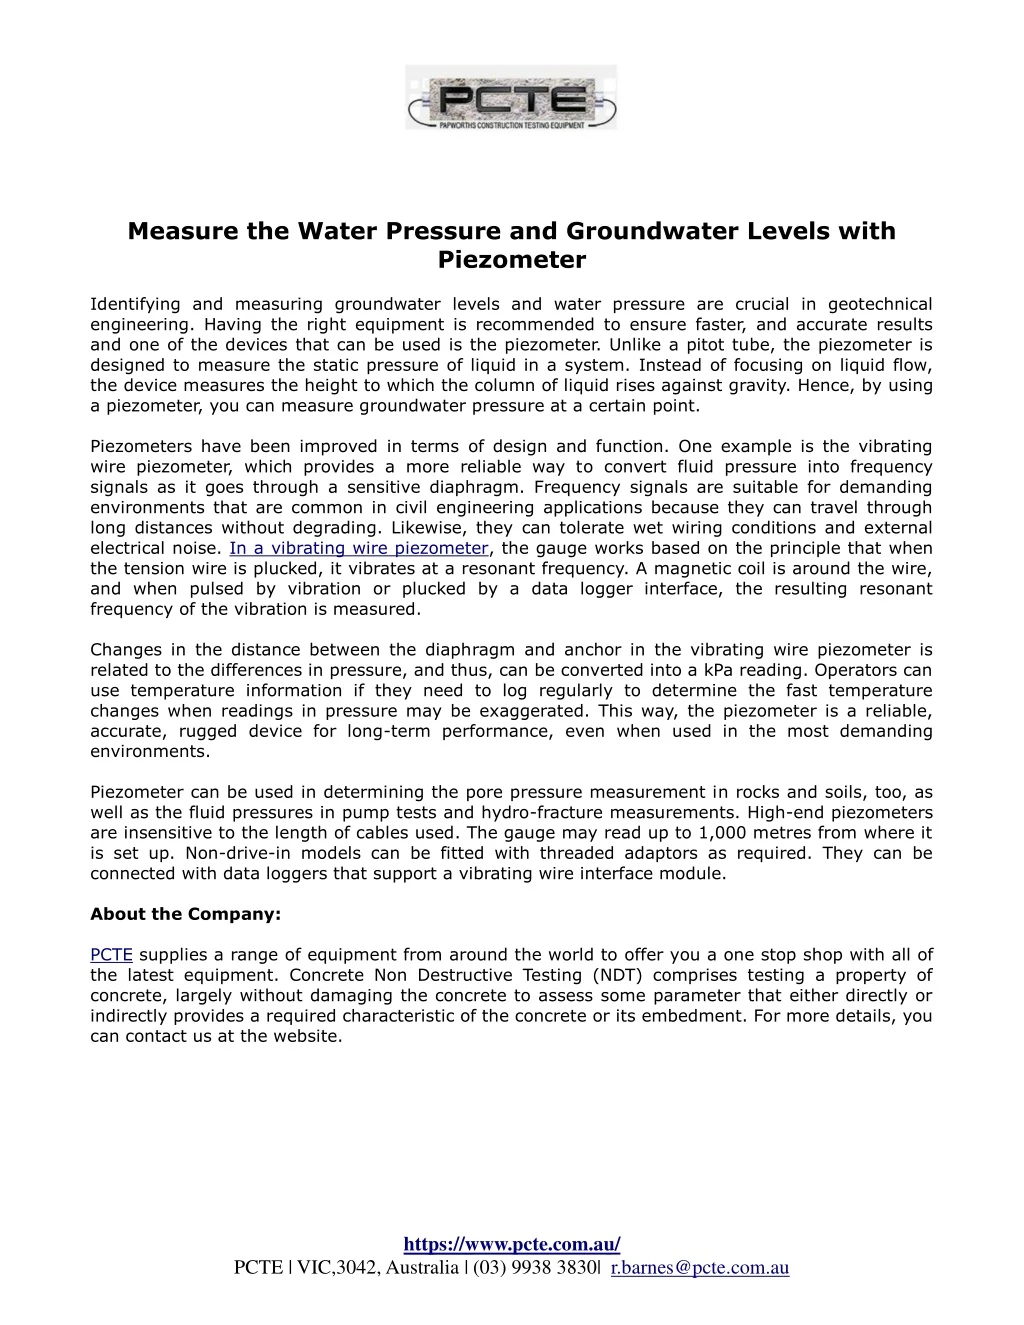 measure the water pressure and groundwater levels